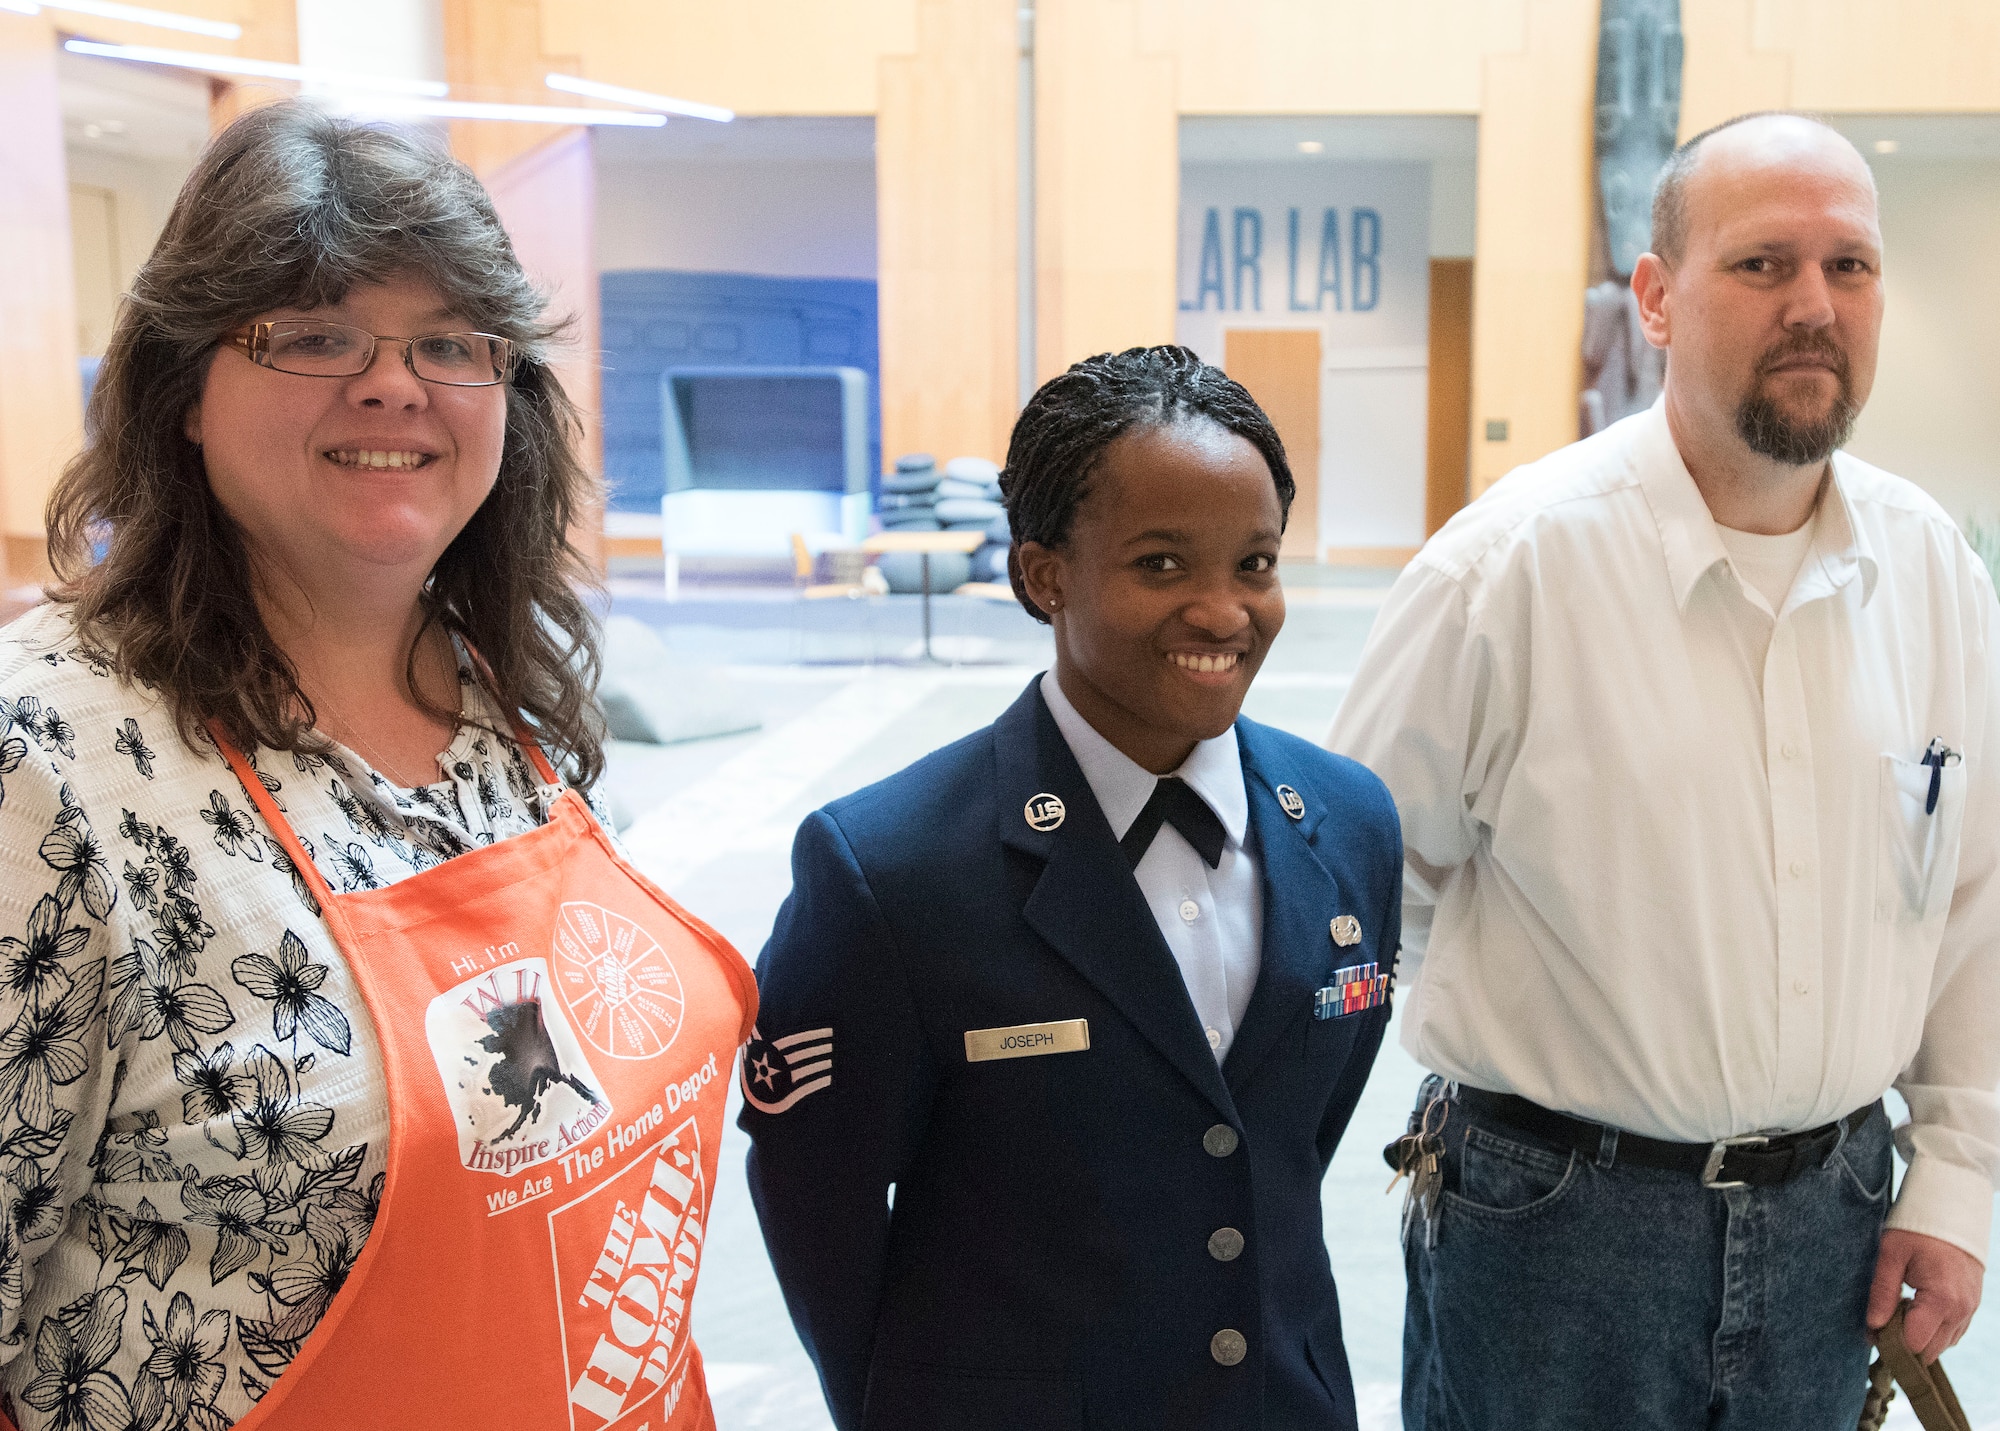 ANCHORAGE, Alaska -- Staff Sgt. Sequoya Joseph, a personnelist with the Alaska Air National Guard's 176th Force Support Flight, is pictured at the Anchorage Museum here Sept. 14, 2016, with Home Depot Alaska District Human Resources Manager Patty St. John and Jake Bainbridge, a therapy dog coordinator with Midnight Sun Service Dogs. Joseph was at the museum to honored for her service. More than 50 volunteers came together to renovate Sgt. Joseph's condominium. The event was the result of a partnership between Home Depot's annual Celebration of Service Campaign and the non-profit That Others May Live Foundation. National Guard photo by Maj. John Callahan.